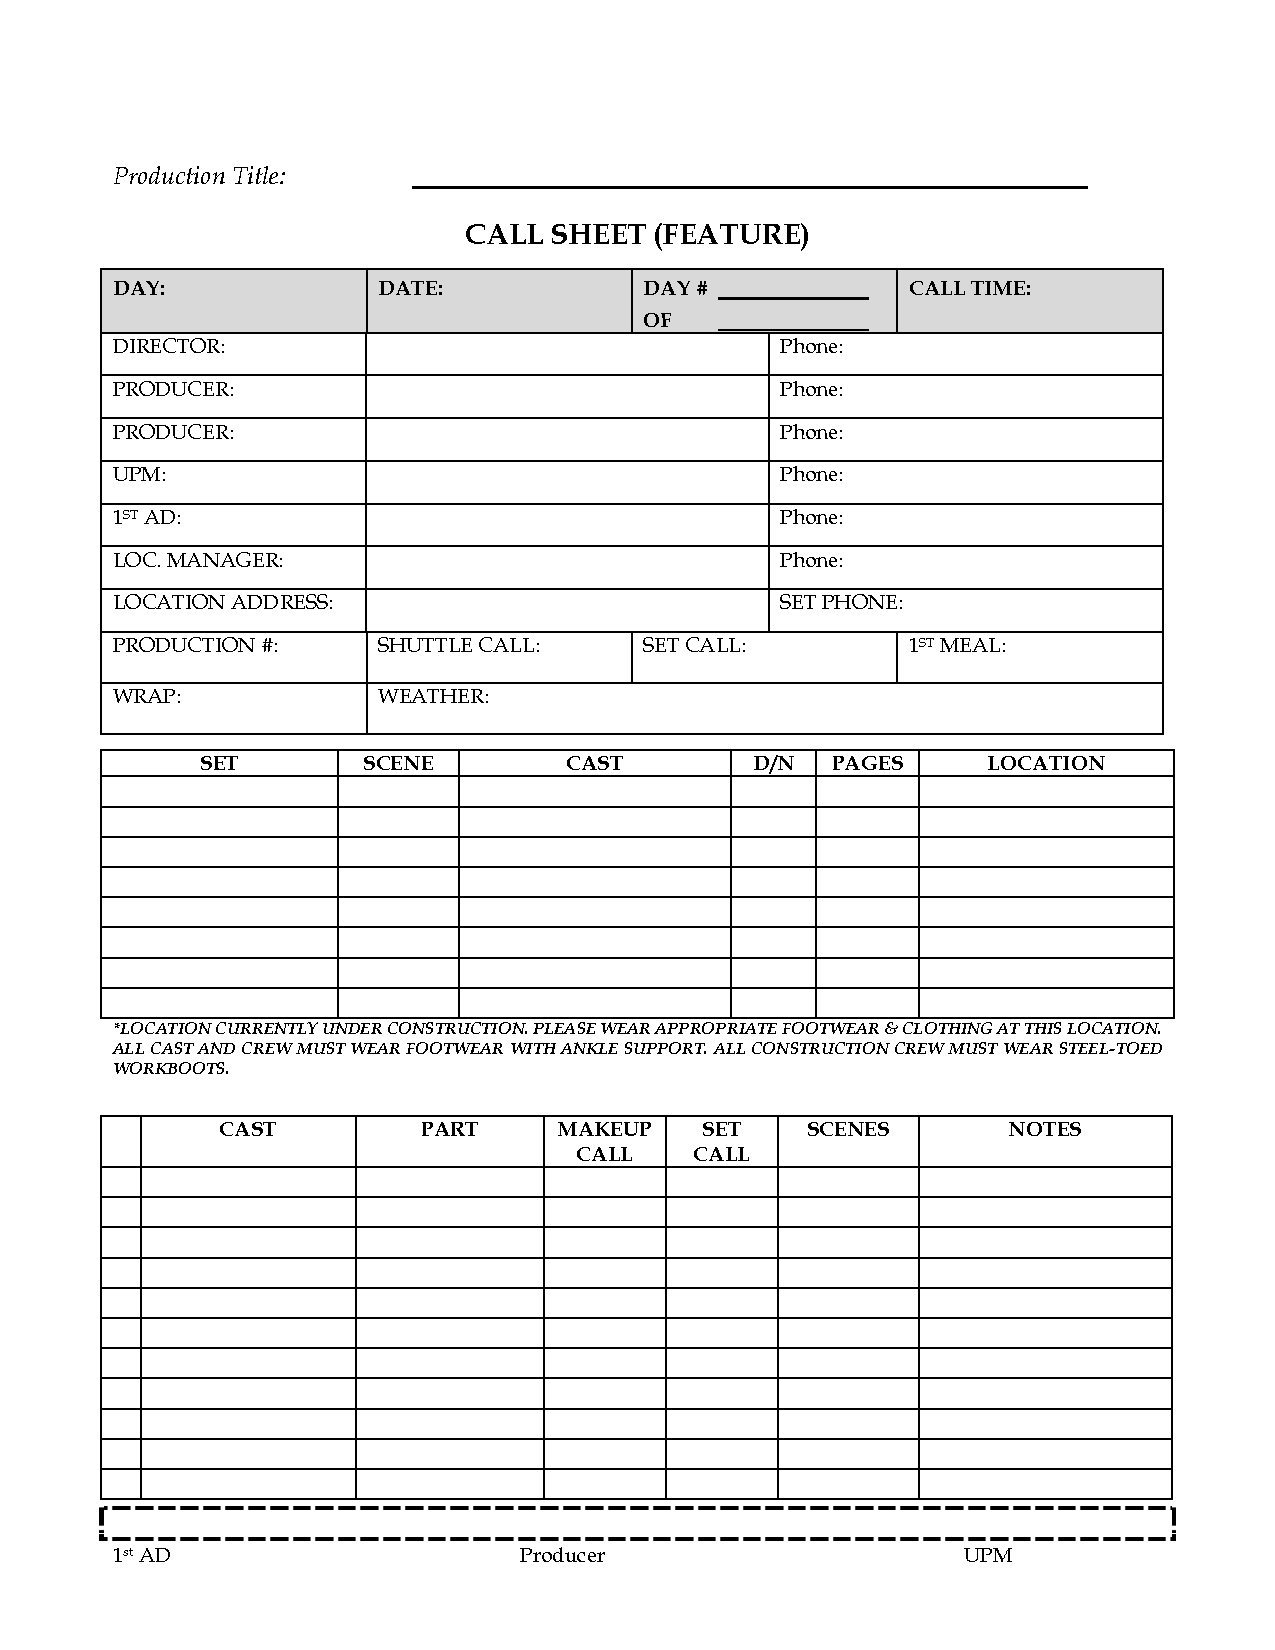 Awesome Call Sheet (Feature) Template Sample For Film With Film Call Sheet Template Word